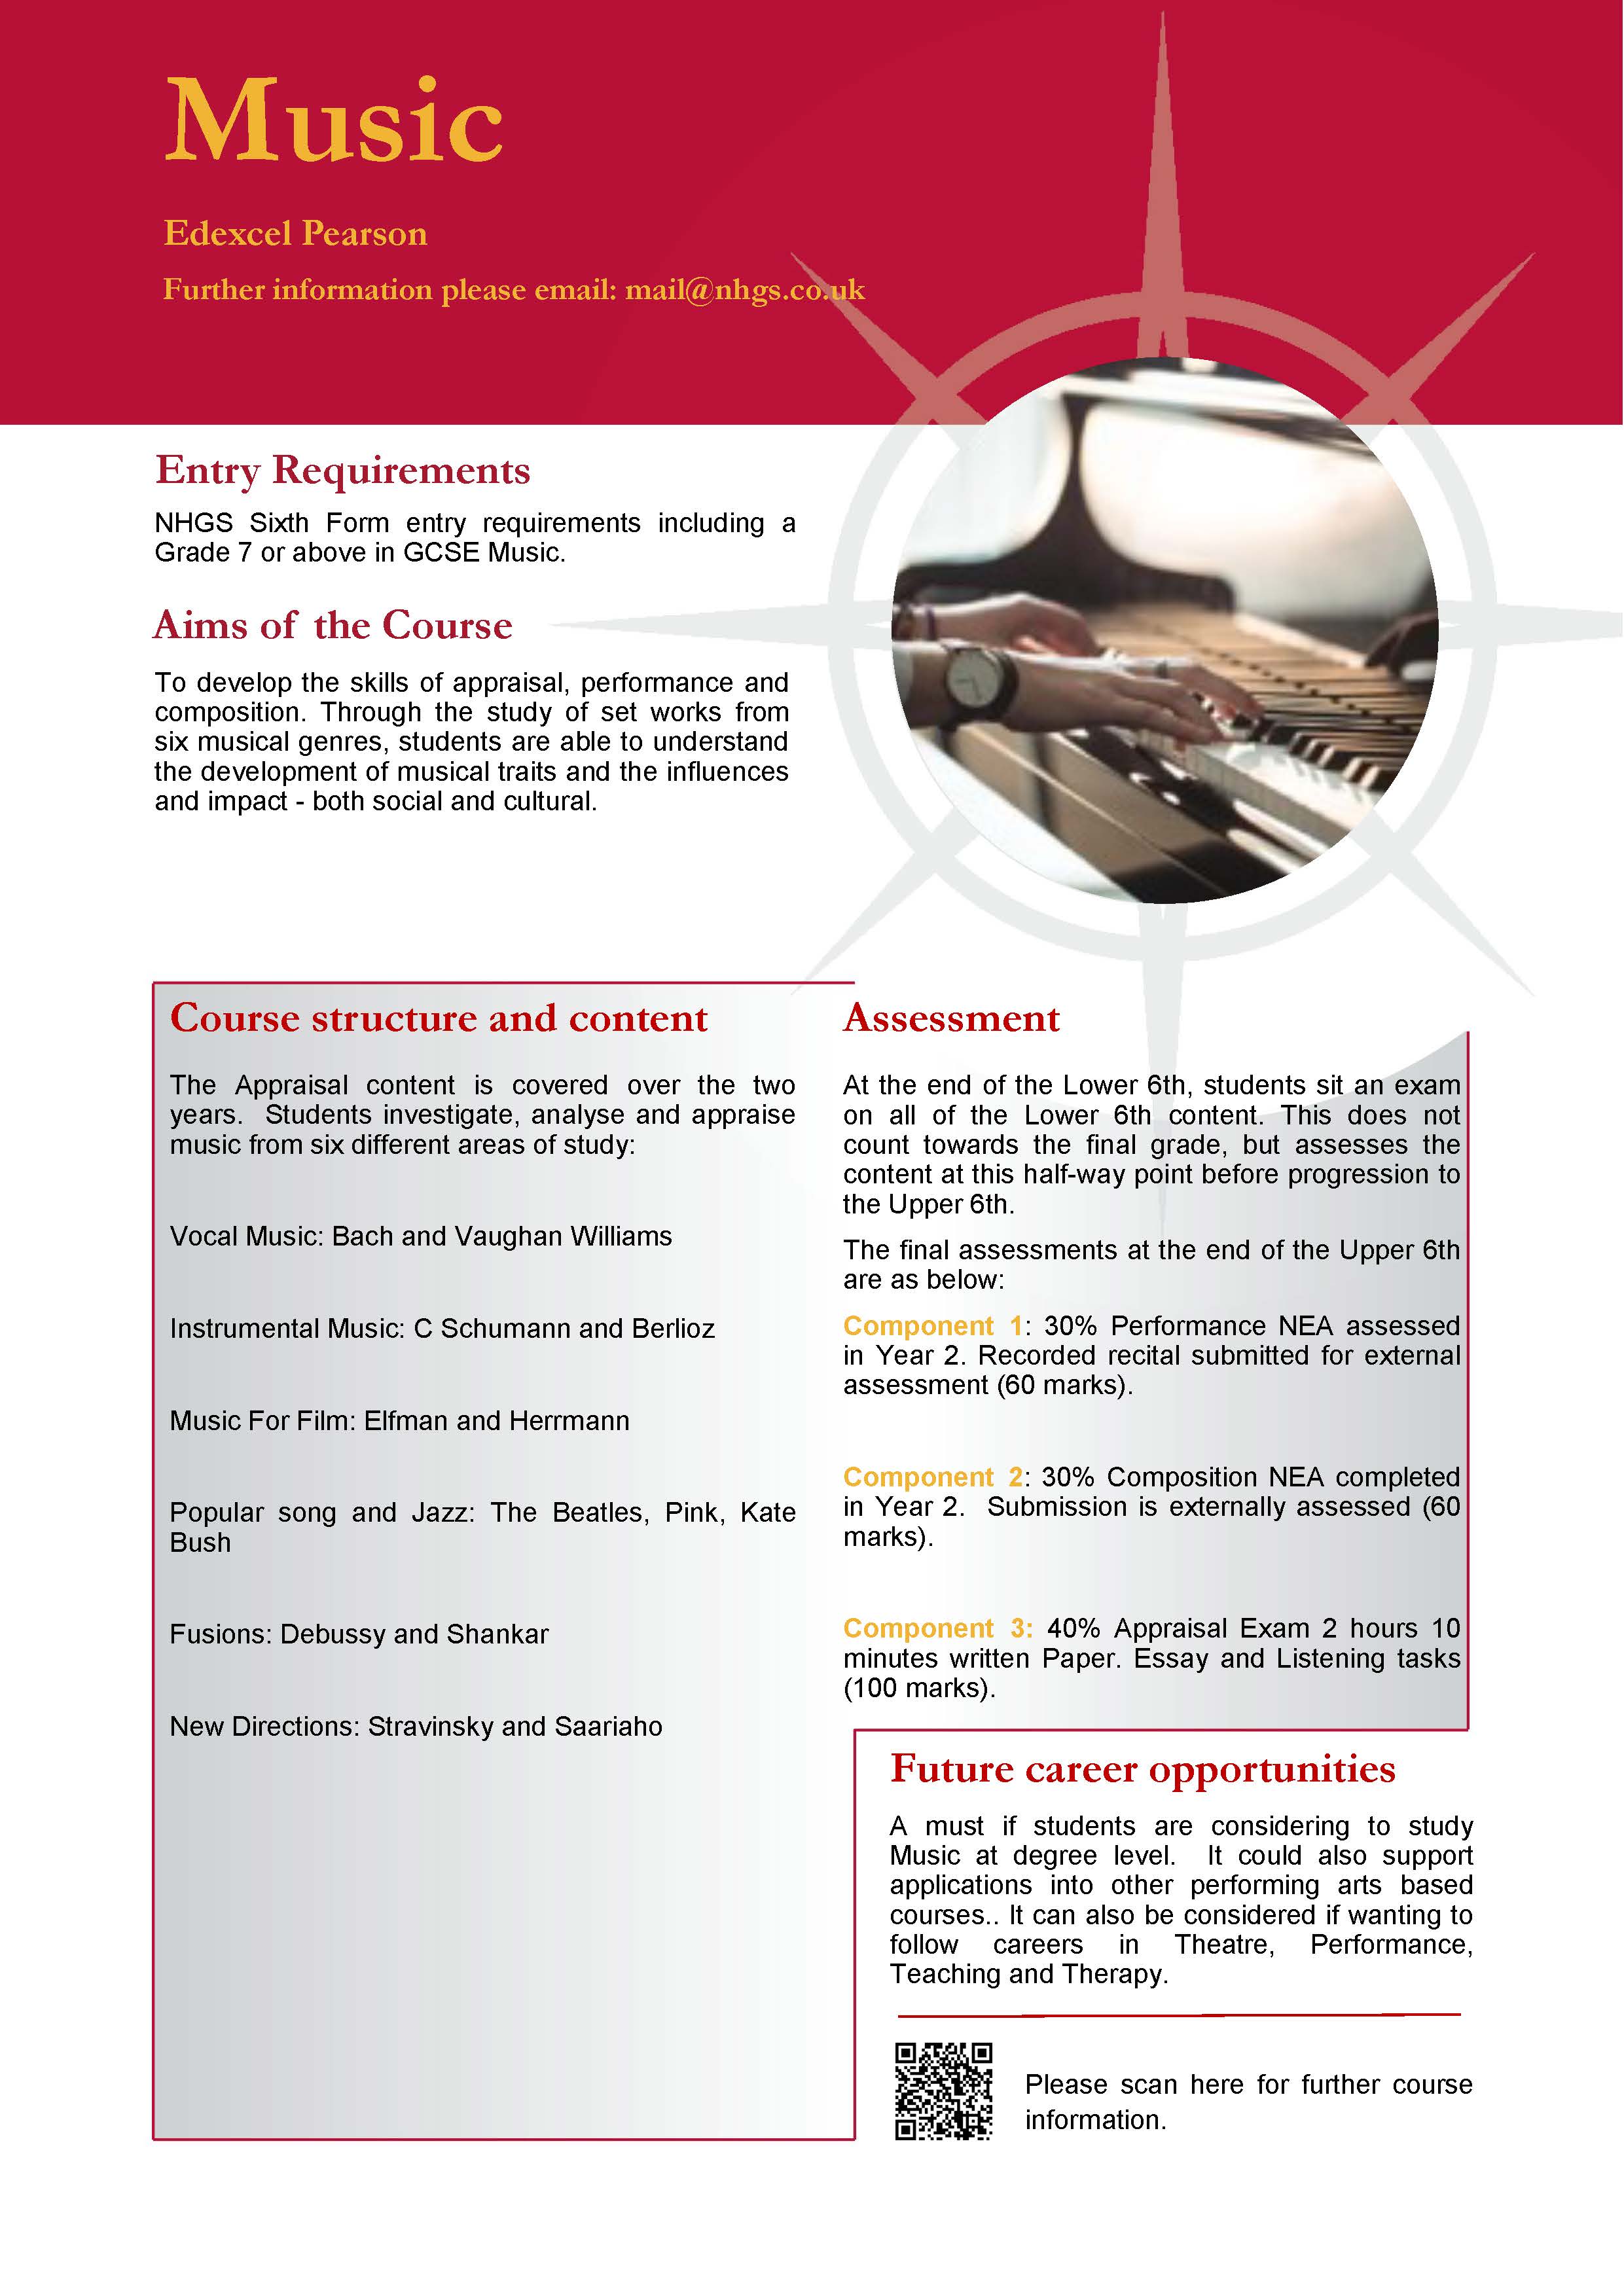 Music A Level Course Flyer, NHGS Sixth Form